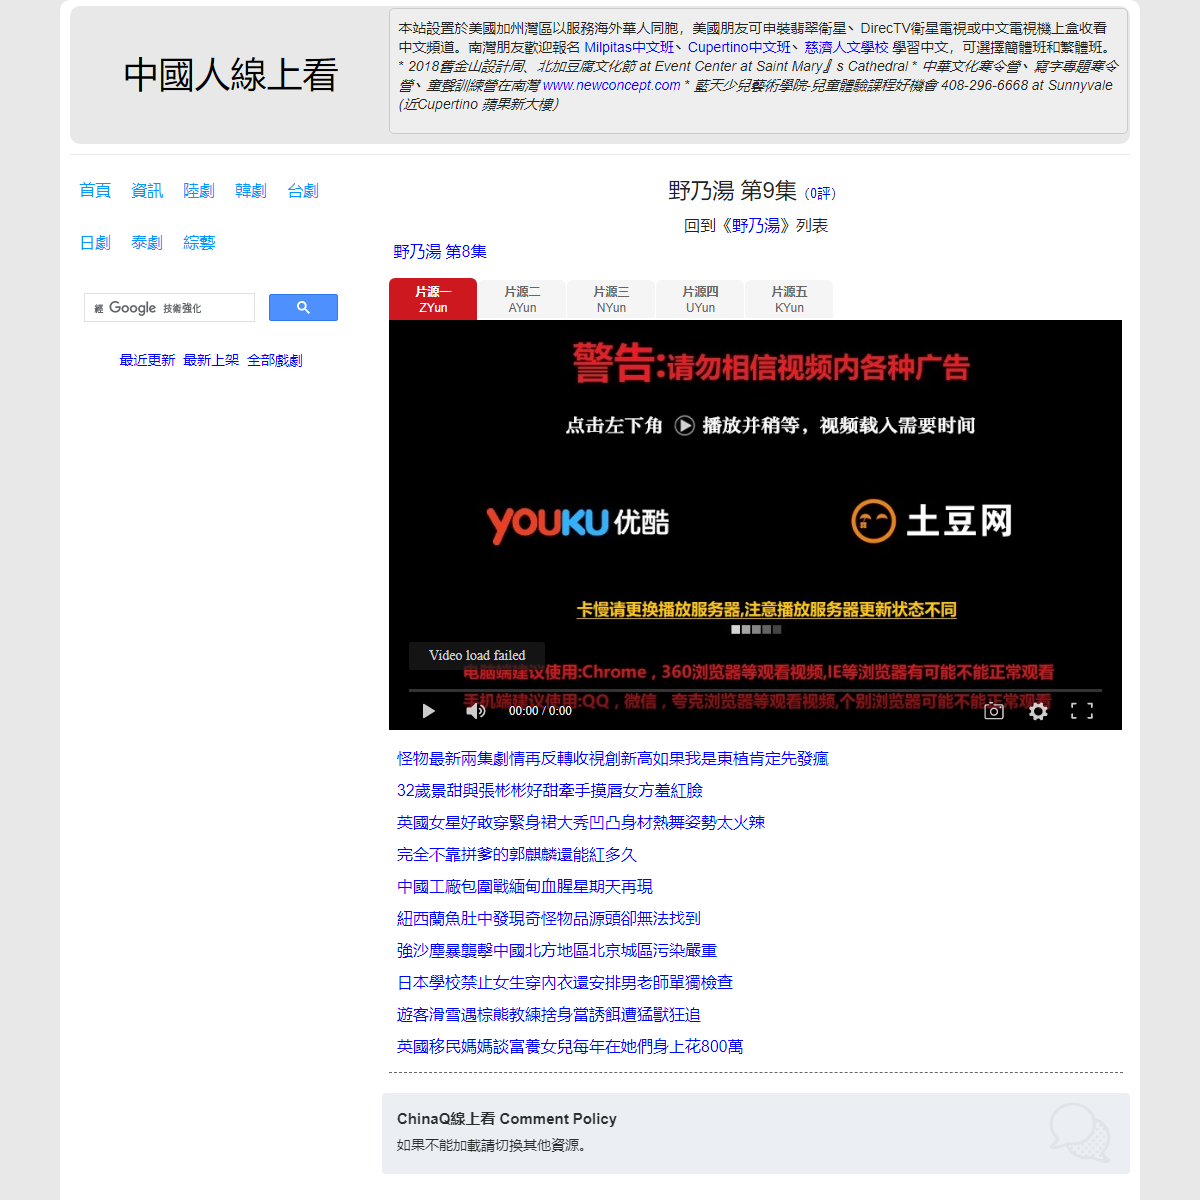 A complete backup of https://chinaq.tv/jp190414b/9.html